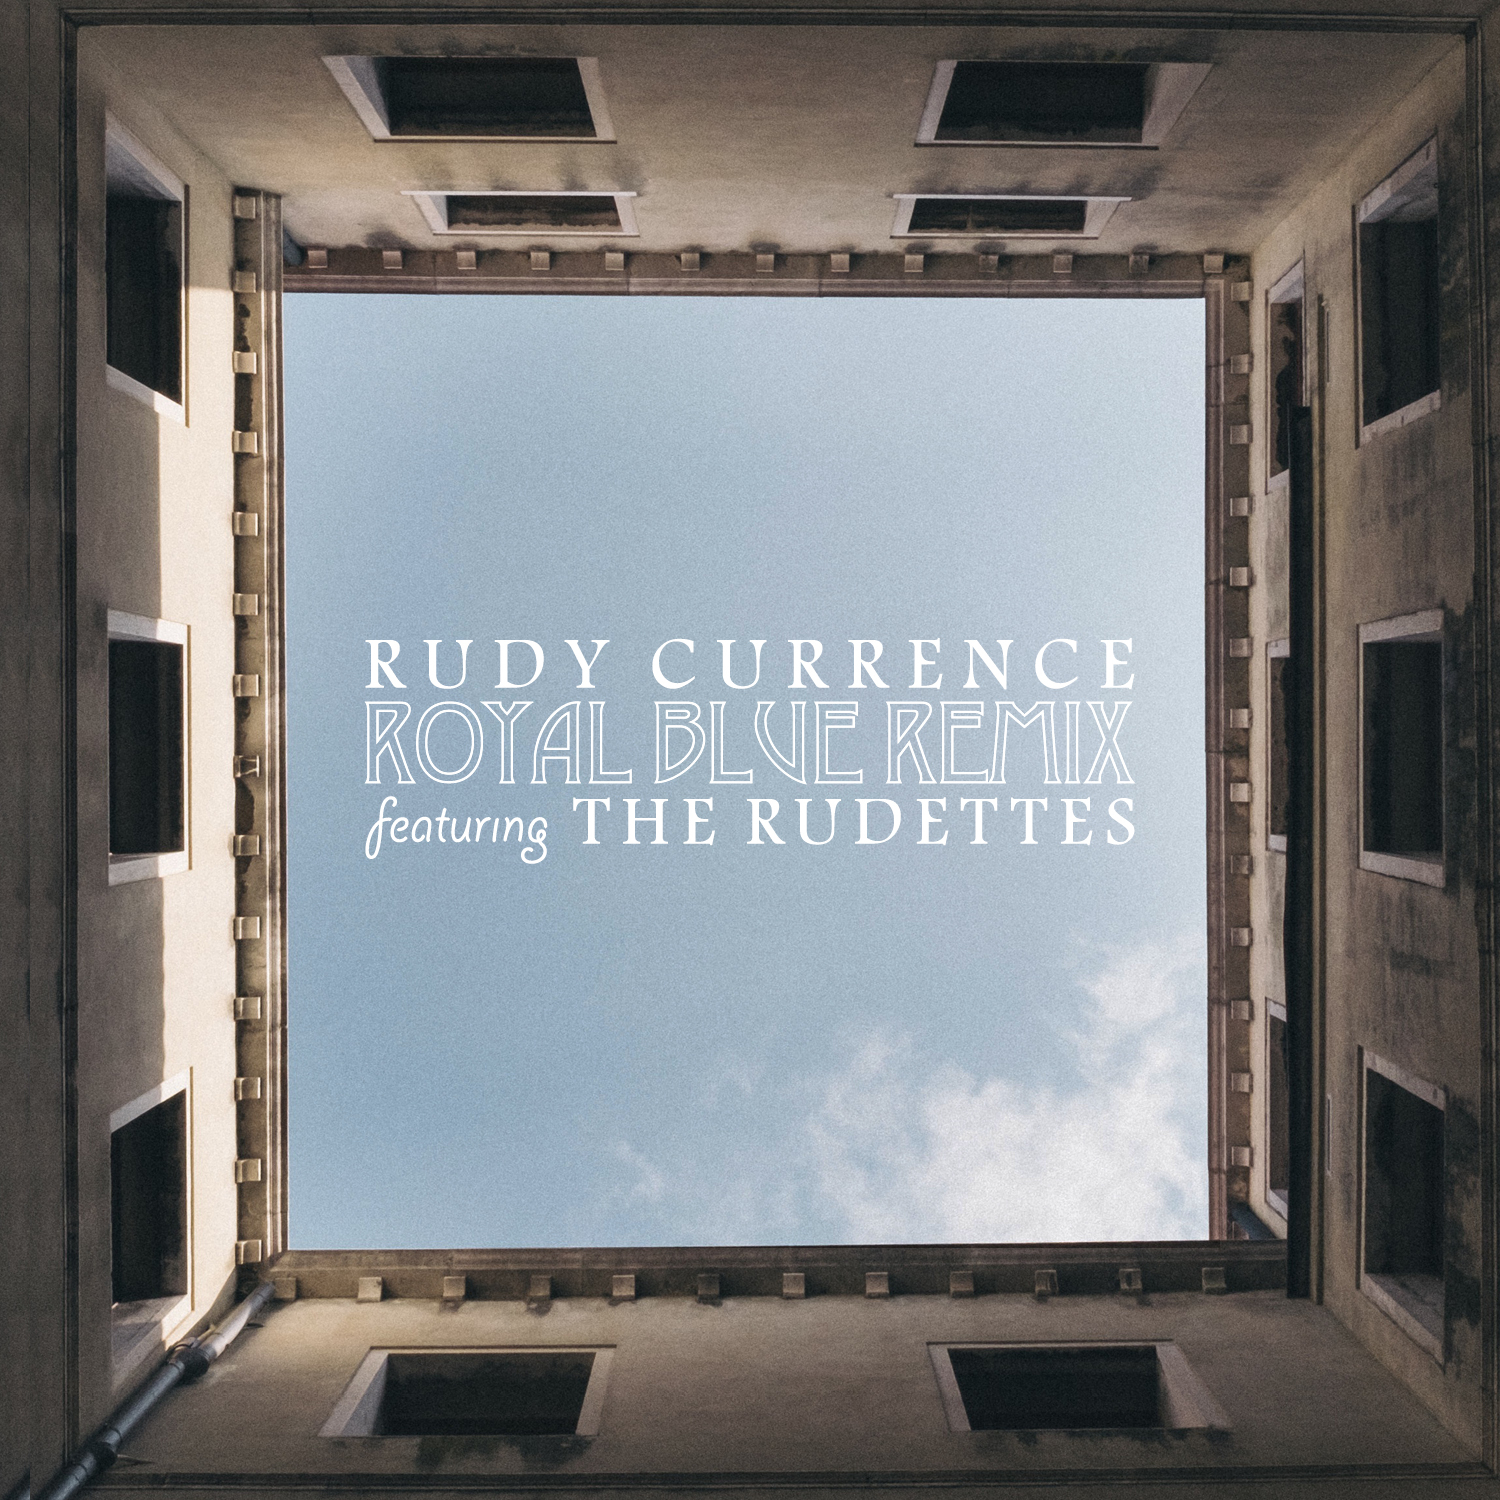 New Music: Rudy Currence - Royal Blue (Remix) (featuring The Rudettes)